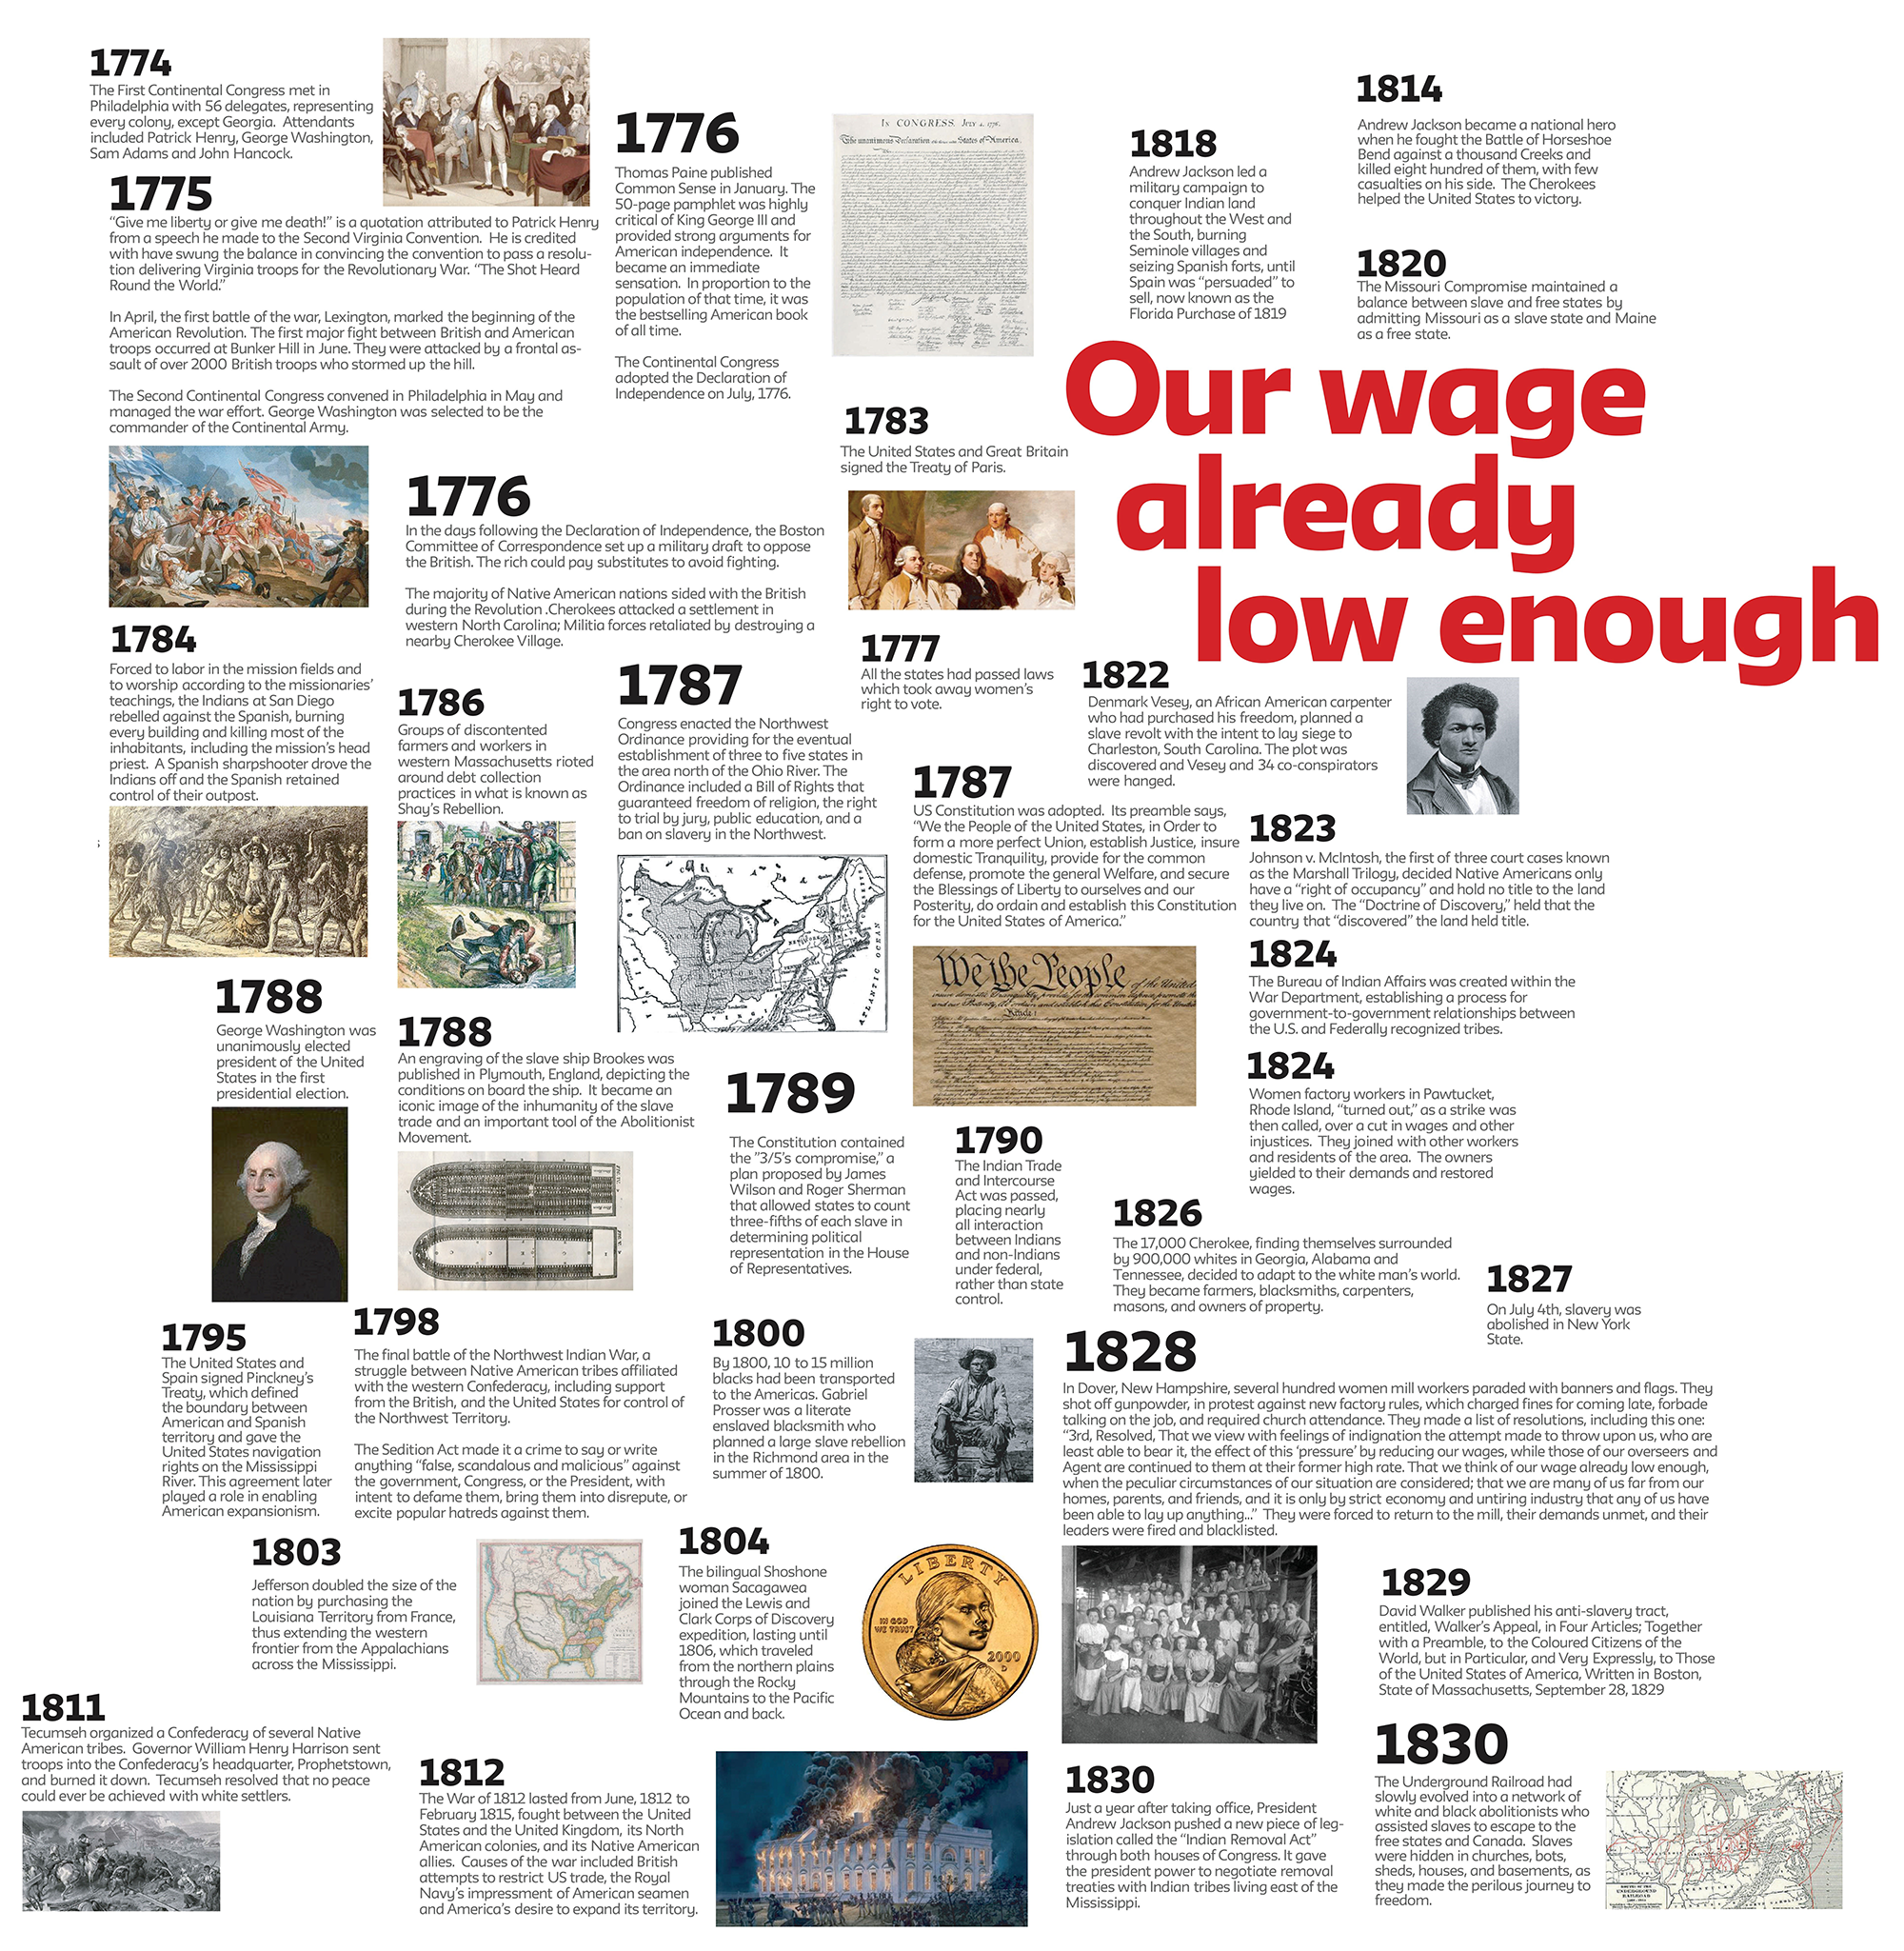 400 Years Of Inequality Timeline, dates 1774-1830